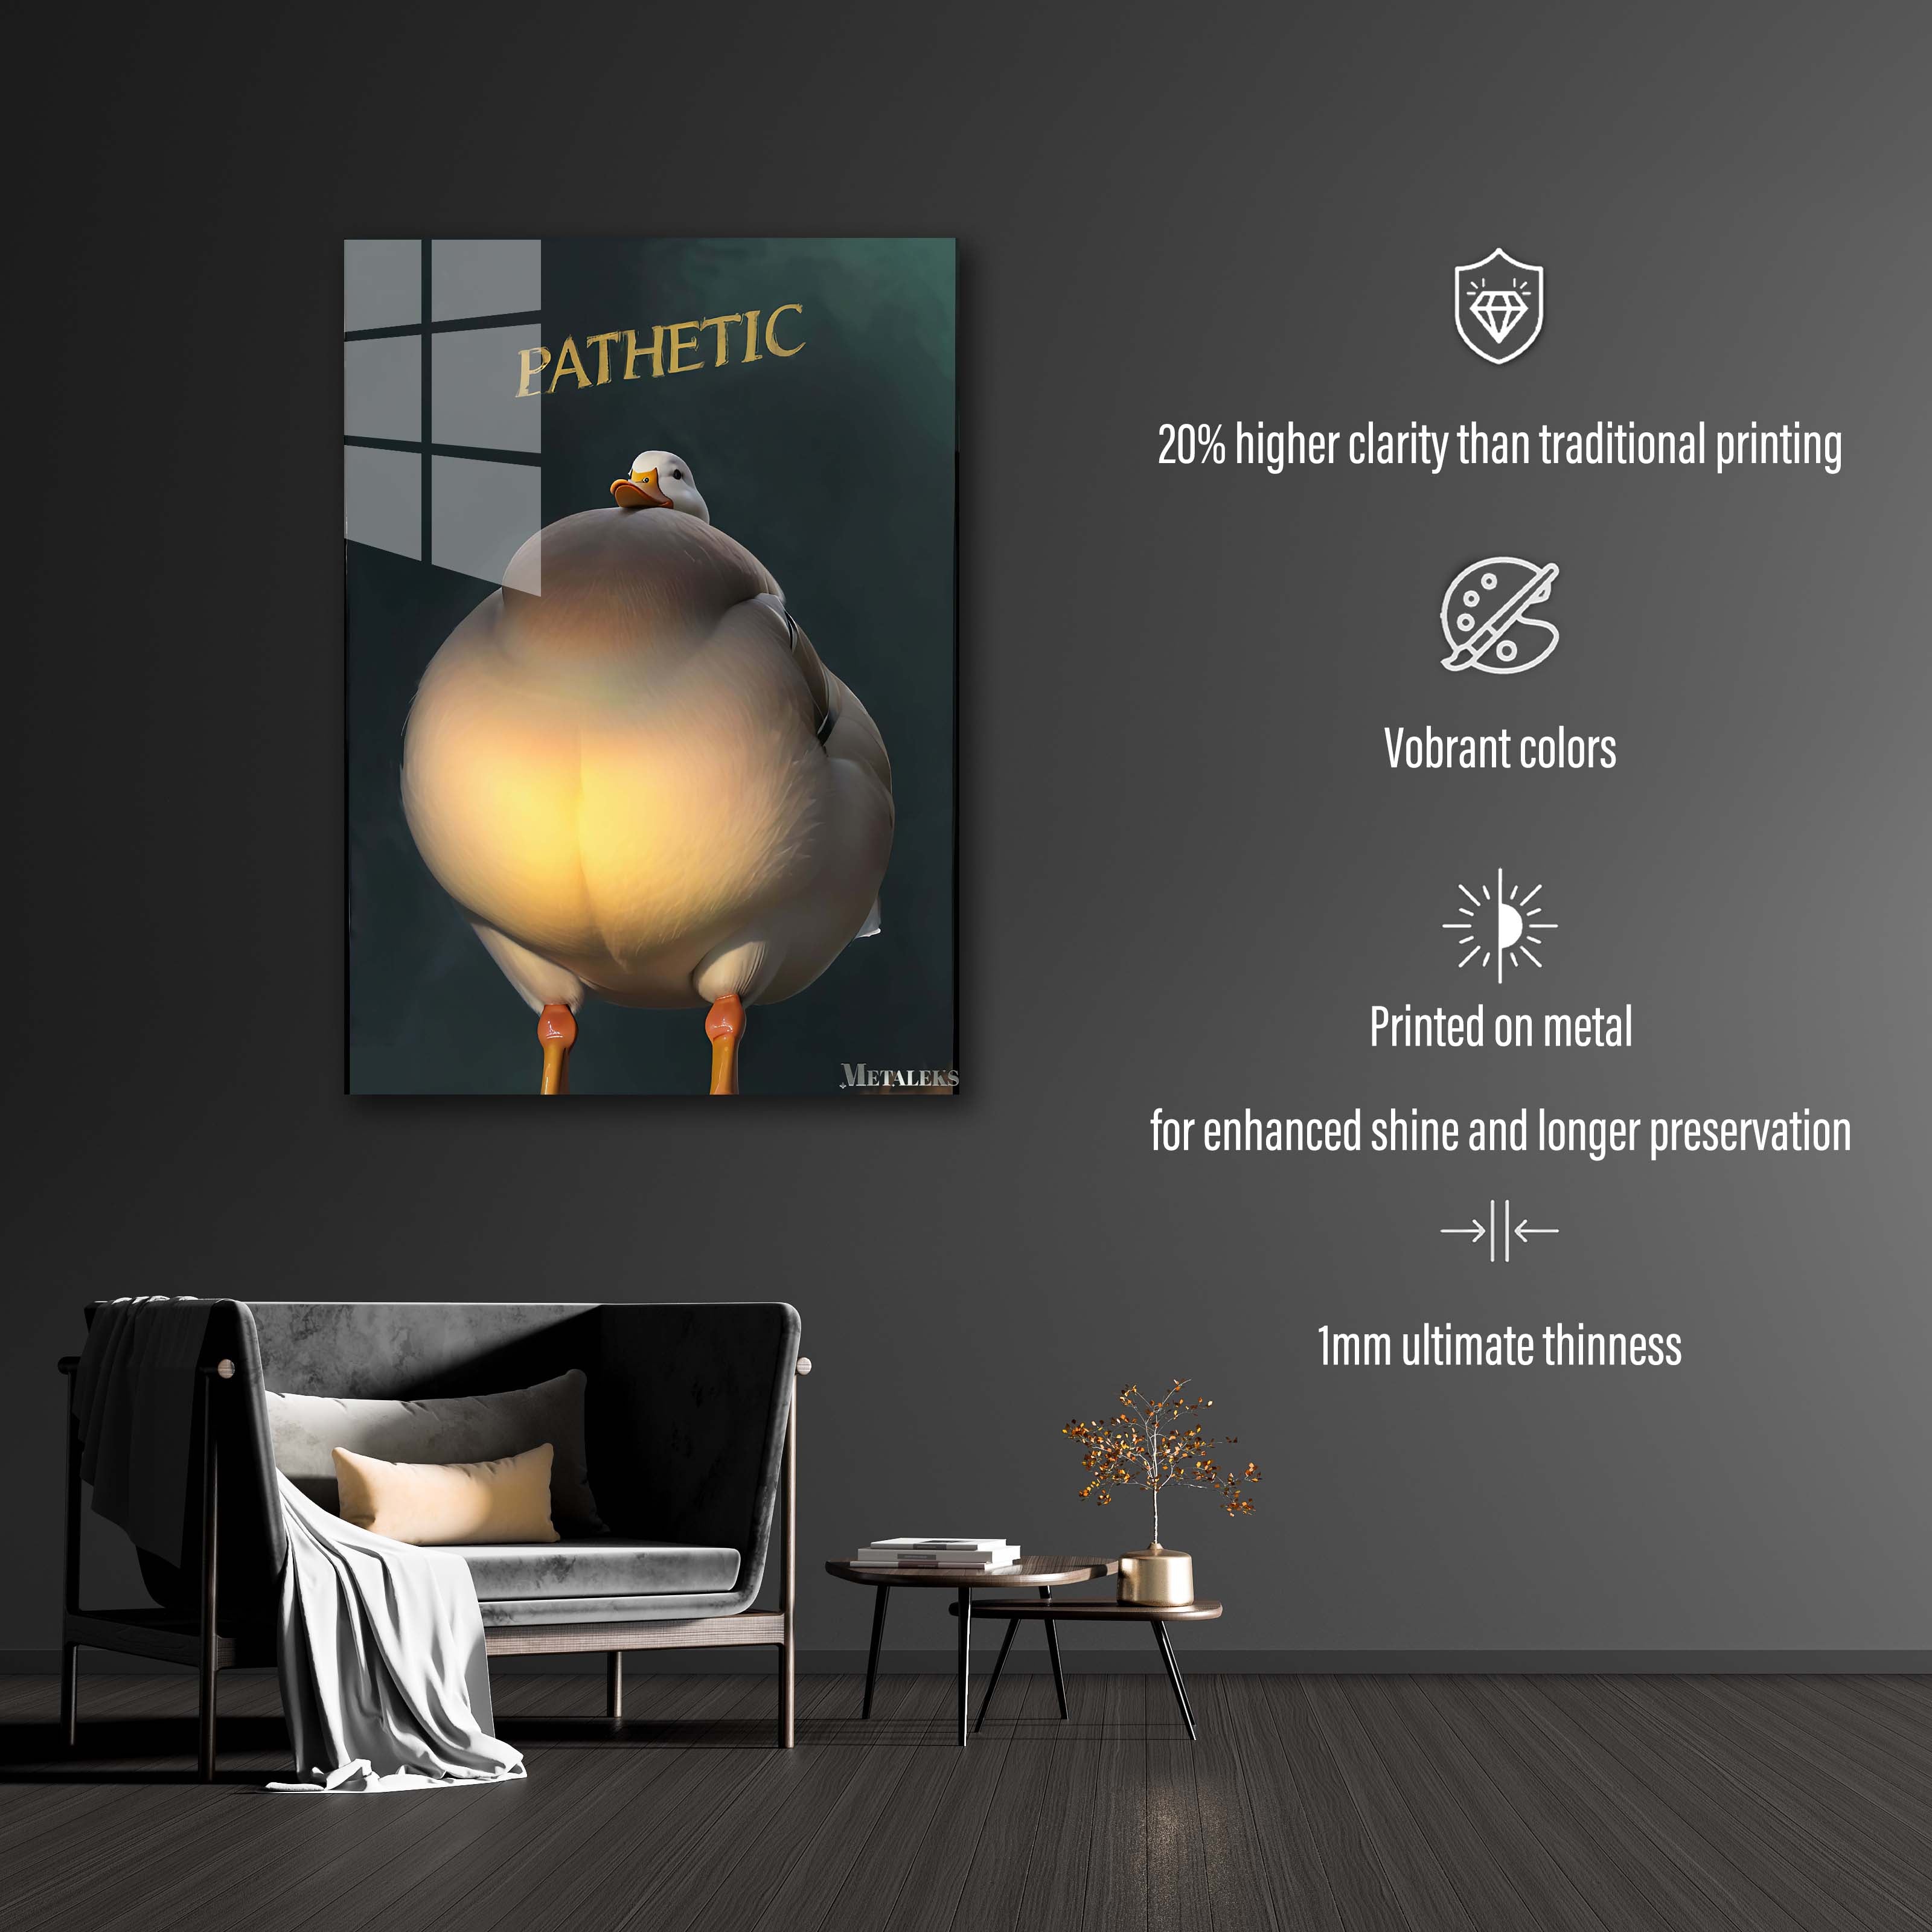 Judgmental Duck posters-designed by @Grafity Artistry